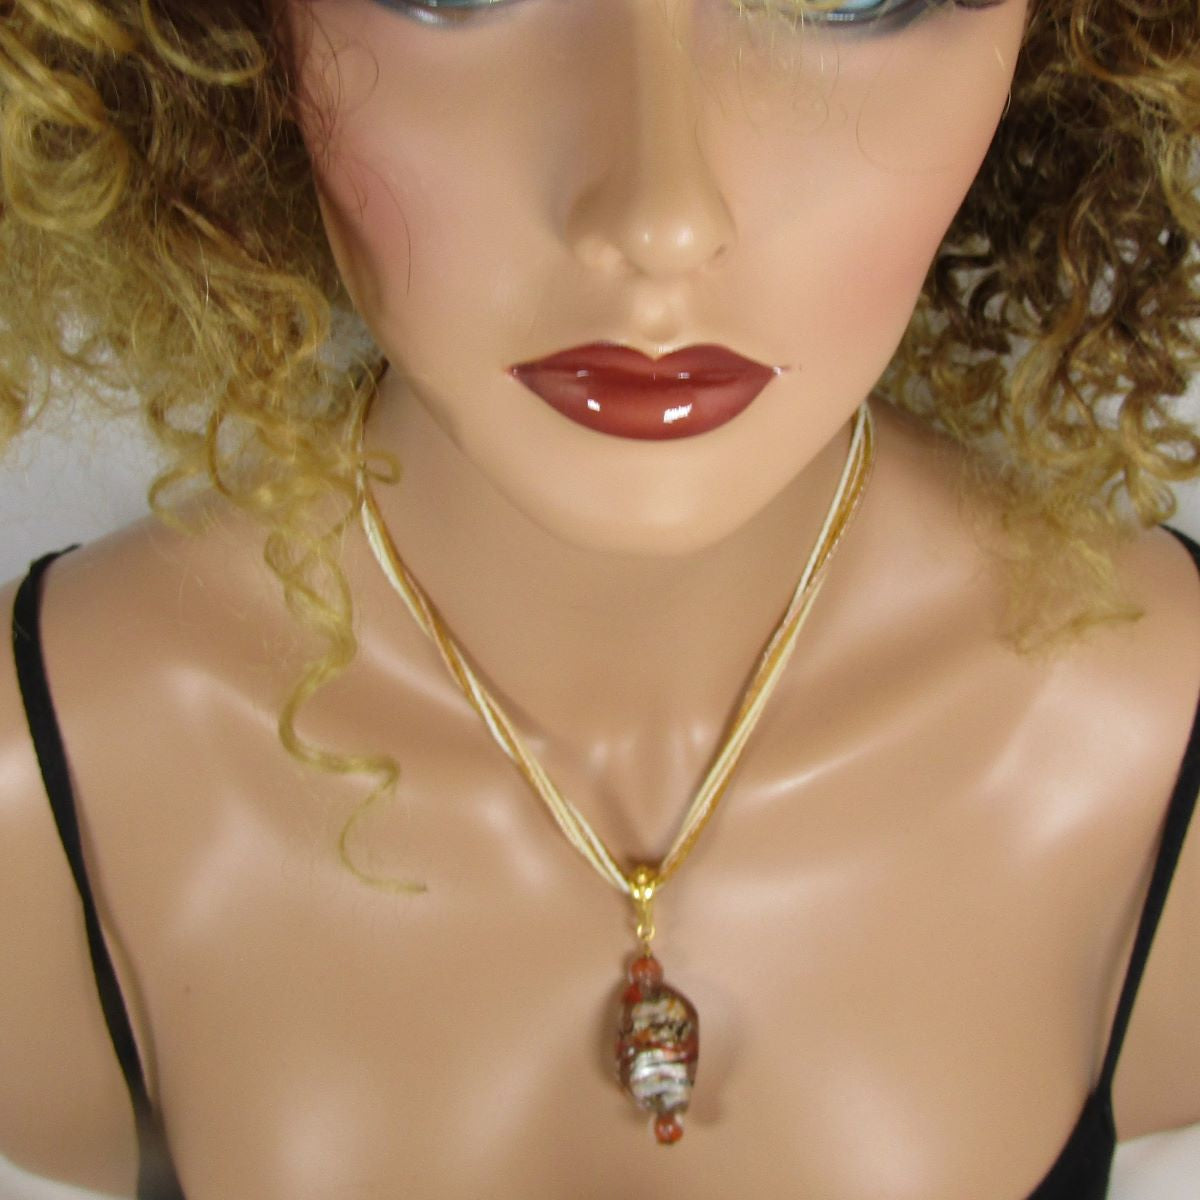 Gold Multi-strand Necklace with Handmade Lampwork Pendant - VP's Jewelry